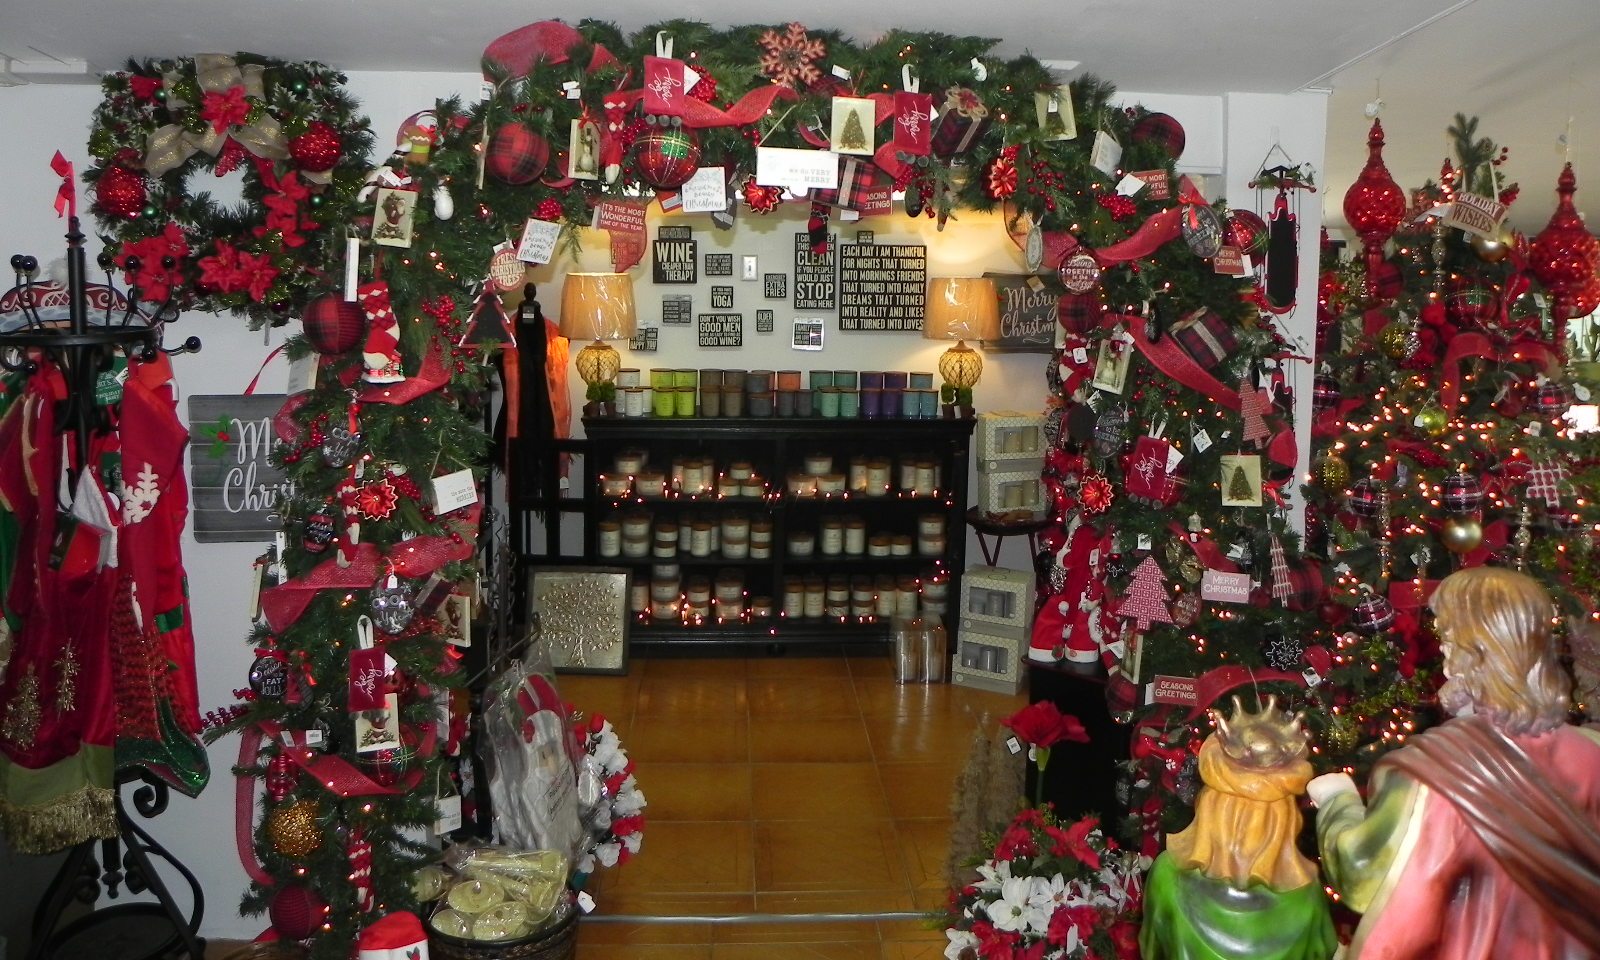 We ve received a HUGE shipment of Christmas decor in stock from ornaments to garland and we re ready to you decorating